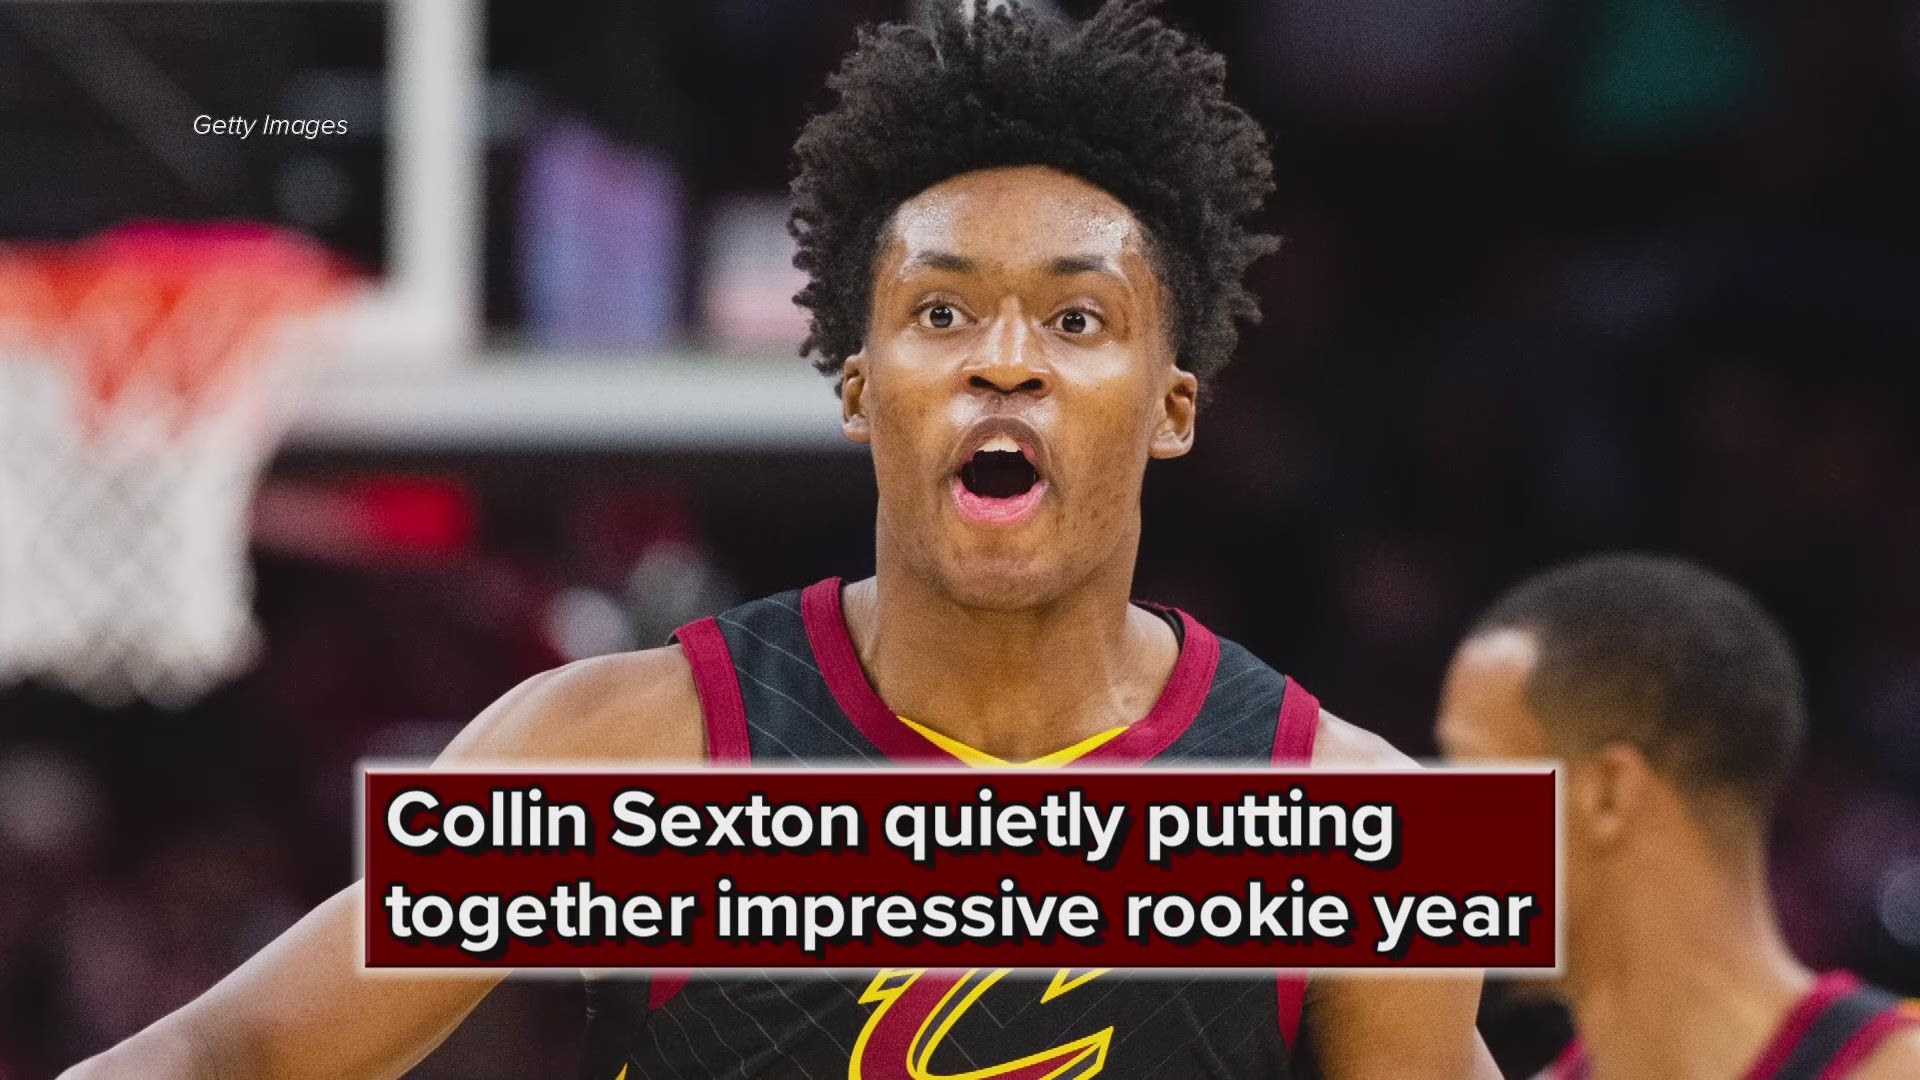 Through 28 games, the Cleveland Cavaliers rookie point guard Collin Sexton is averaging 15.8 points, 2.6 assists and 3.1 rebounds.